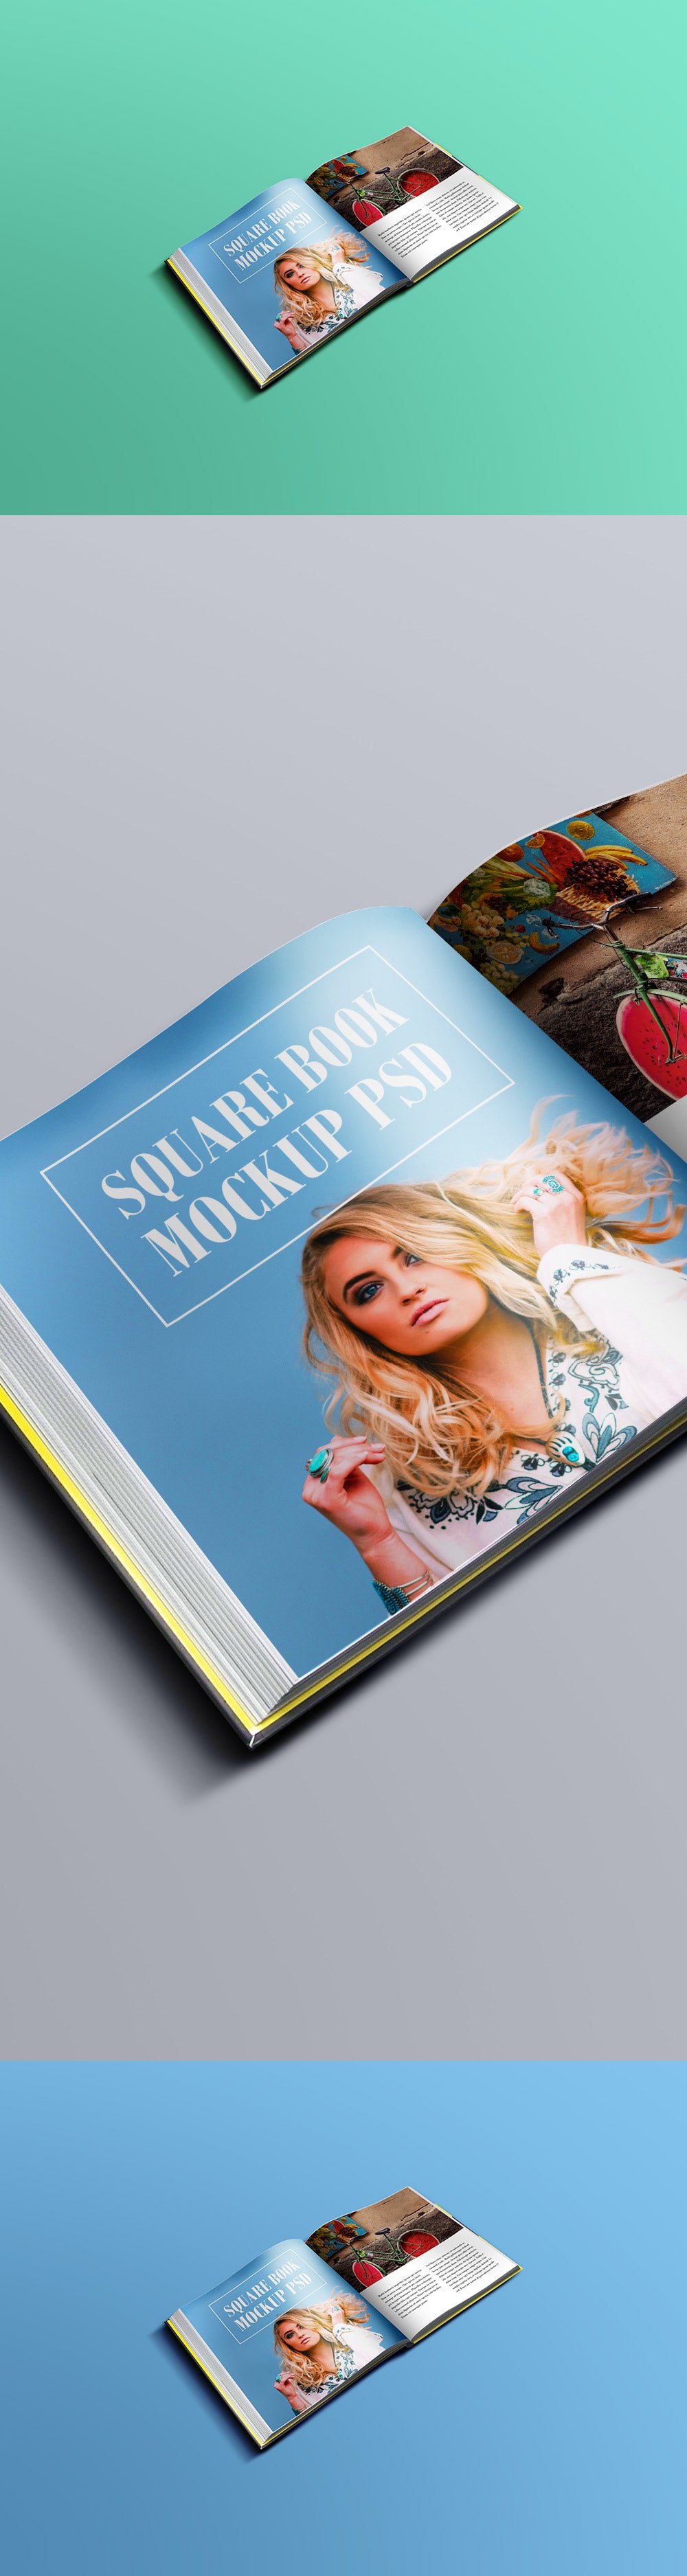 Free Square Book or Magazine or Newspaper Mockup PSD